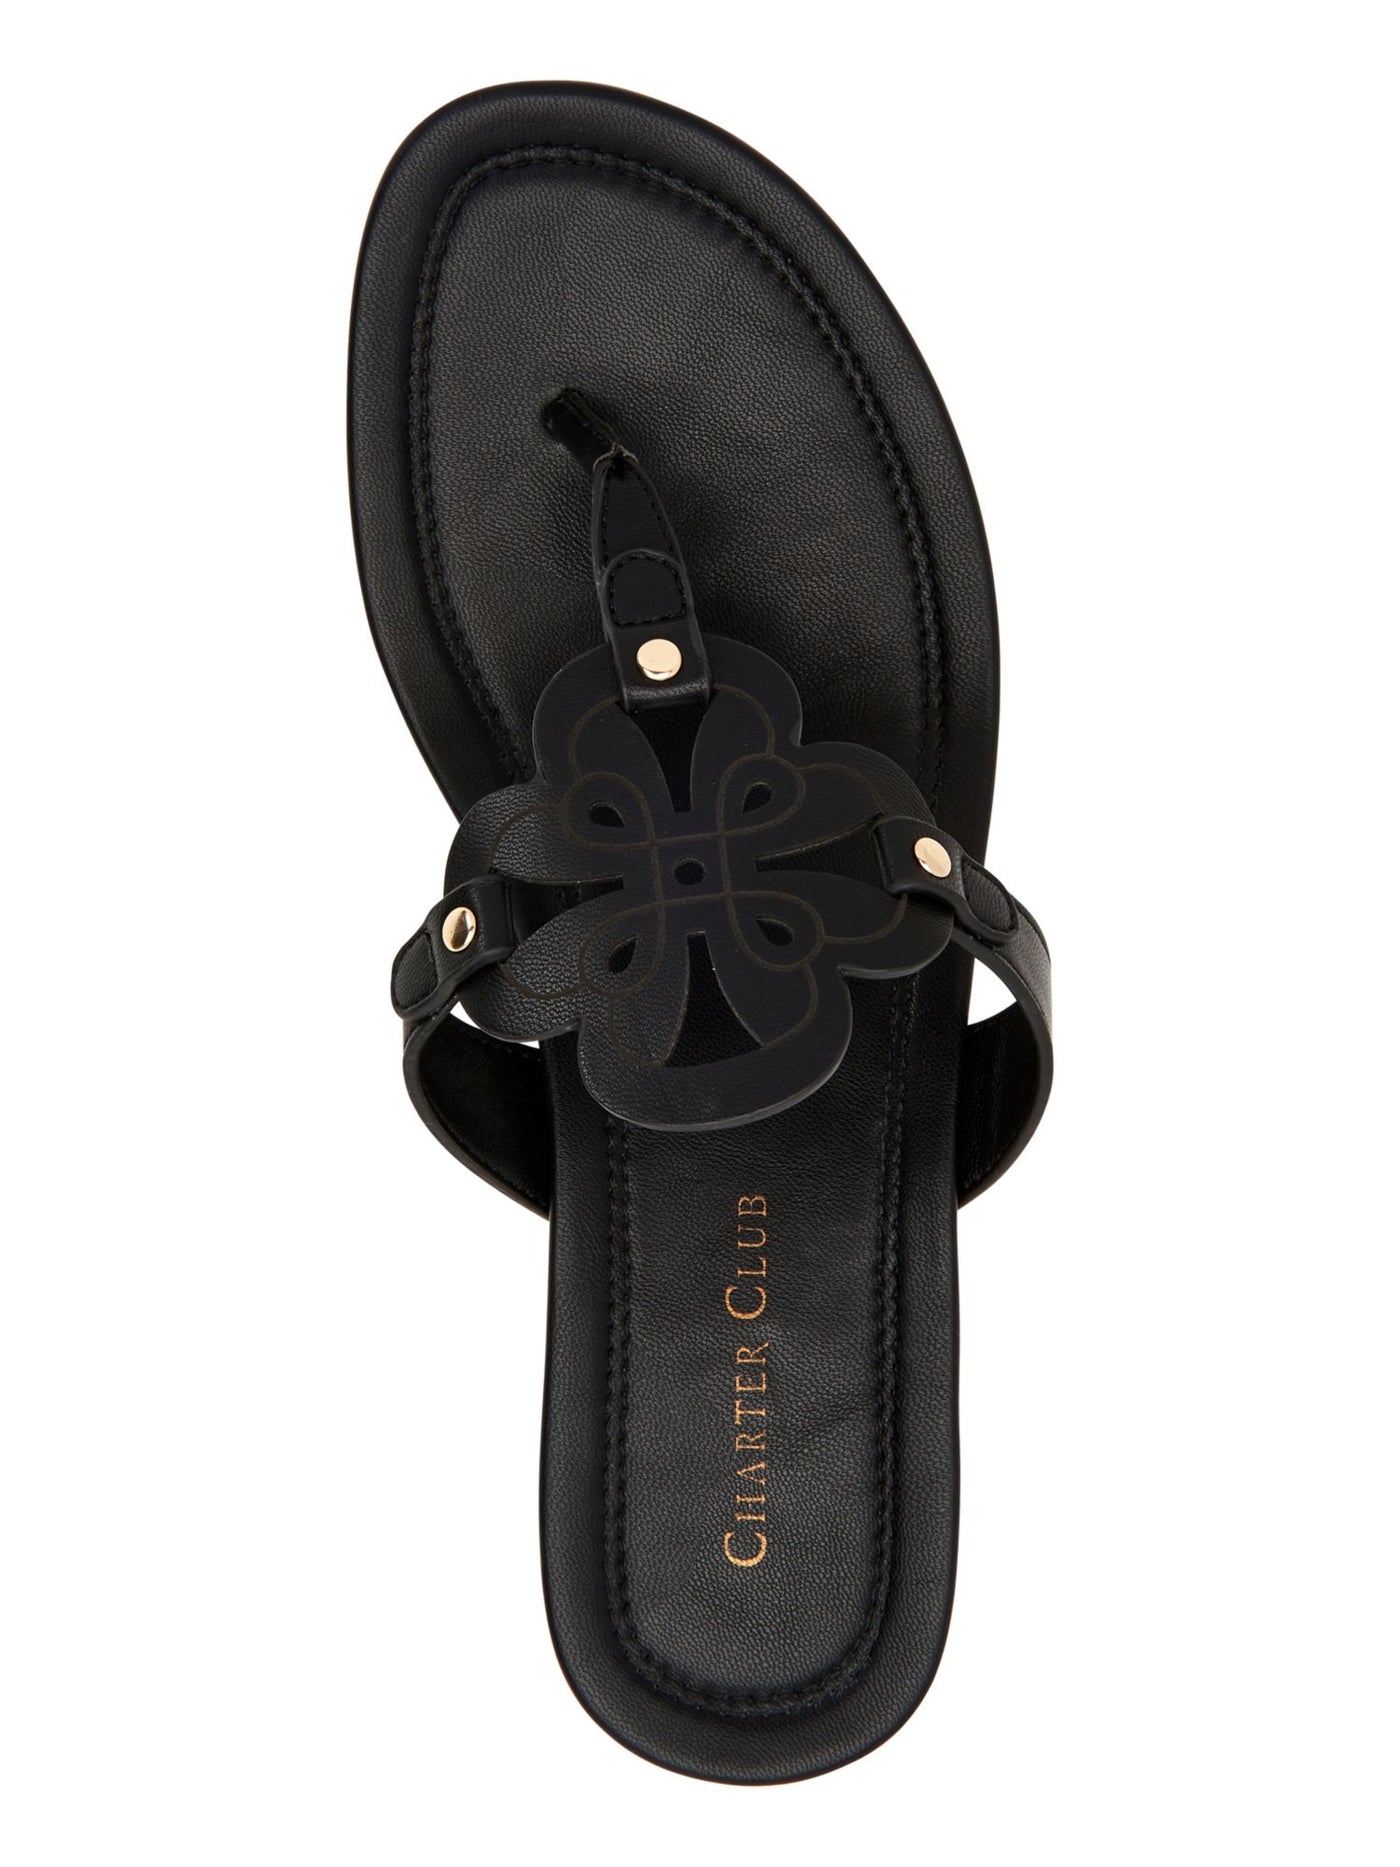 CHARTER CLUB Womens Black Cutout Medallion T-Strap Penelope Almond Toe Wedge Slip On Thong Sandals Shoes 9 M